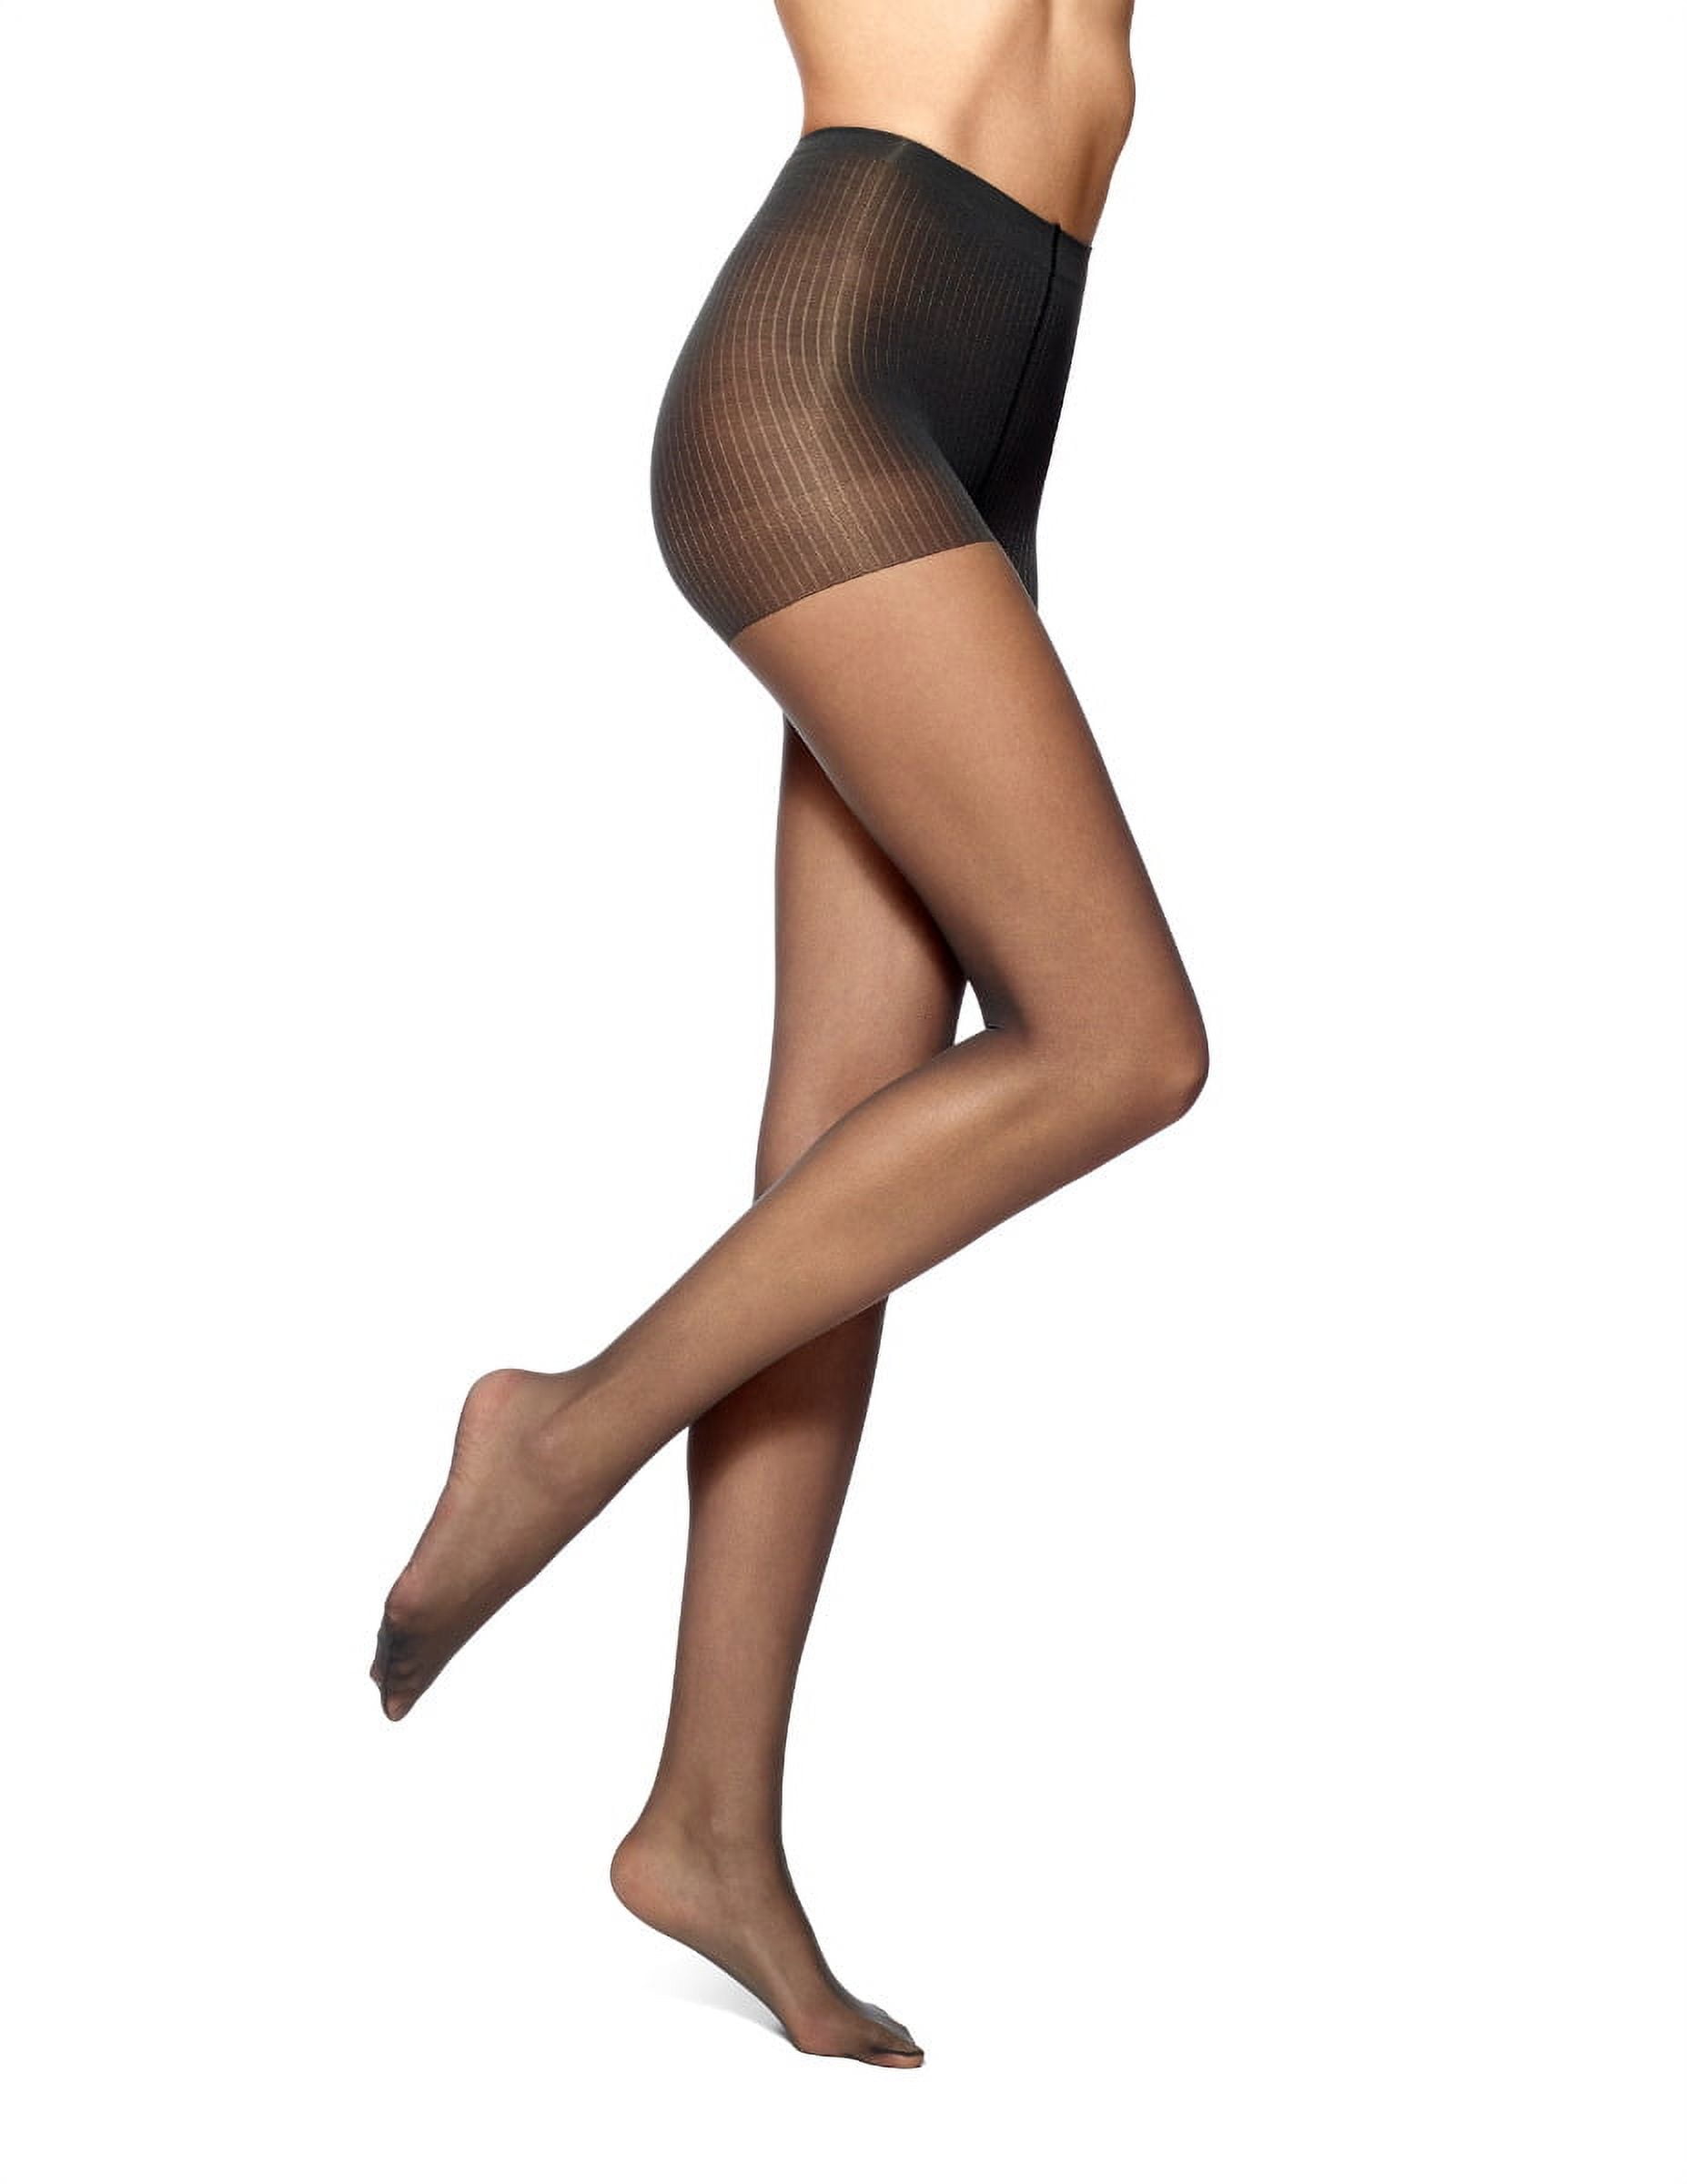 No Nonsense Knee Highs, Comfort Top, Sheer Toe, Size Plus, Nude Y19, Value  Pack, Shop